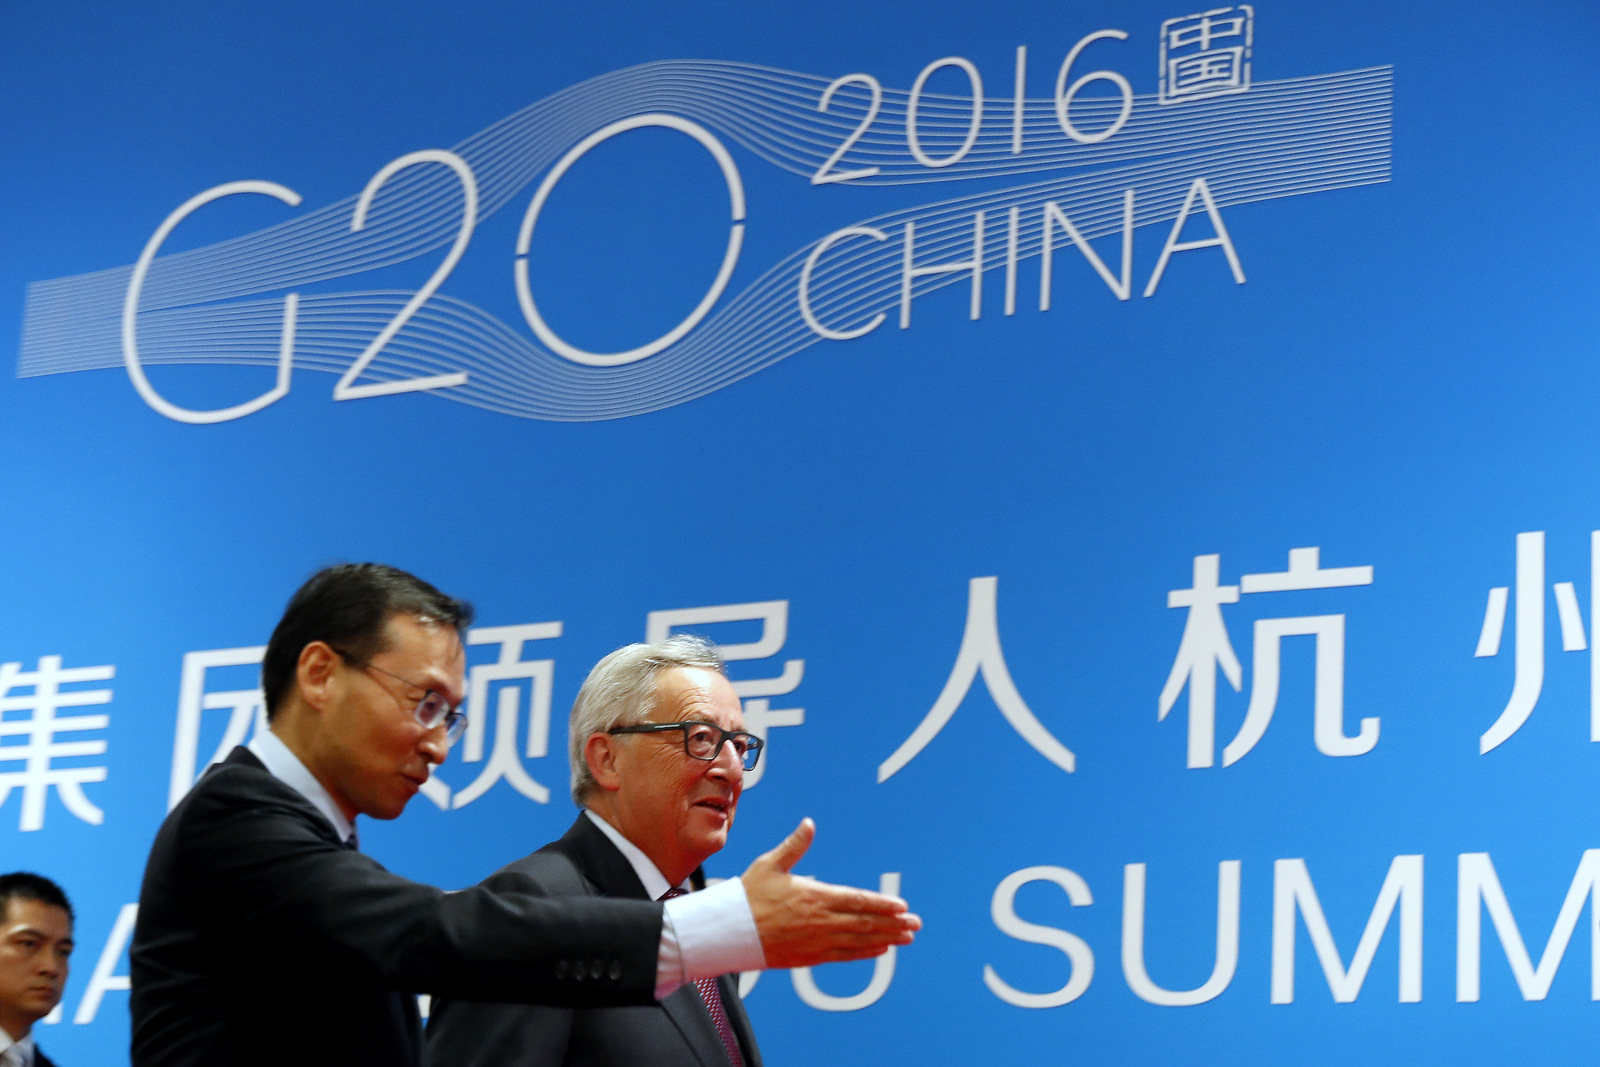 European Commission President Jean-Claude Juncker, right, is shown the way by a Chinese official as he arrives at the G20 Summit in Hangzhou in eastern China's Zhejiang province, Sunday, Sept. 4, 2016. (AP/Ng Han Guan)